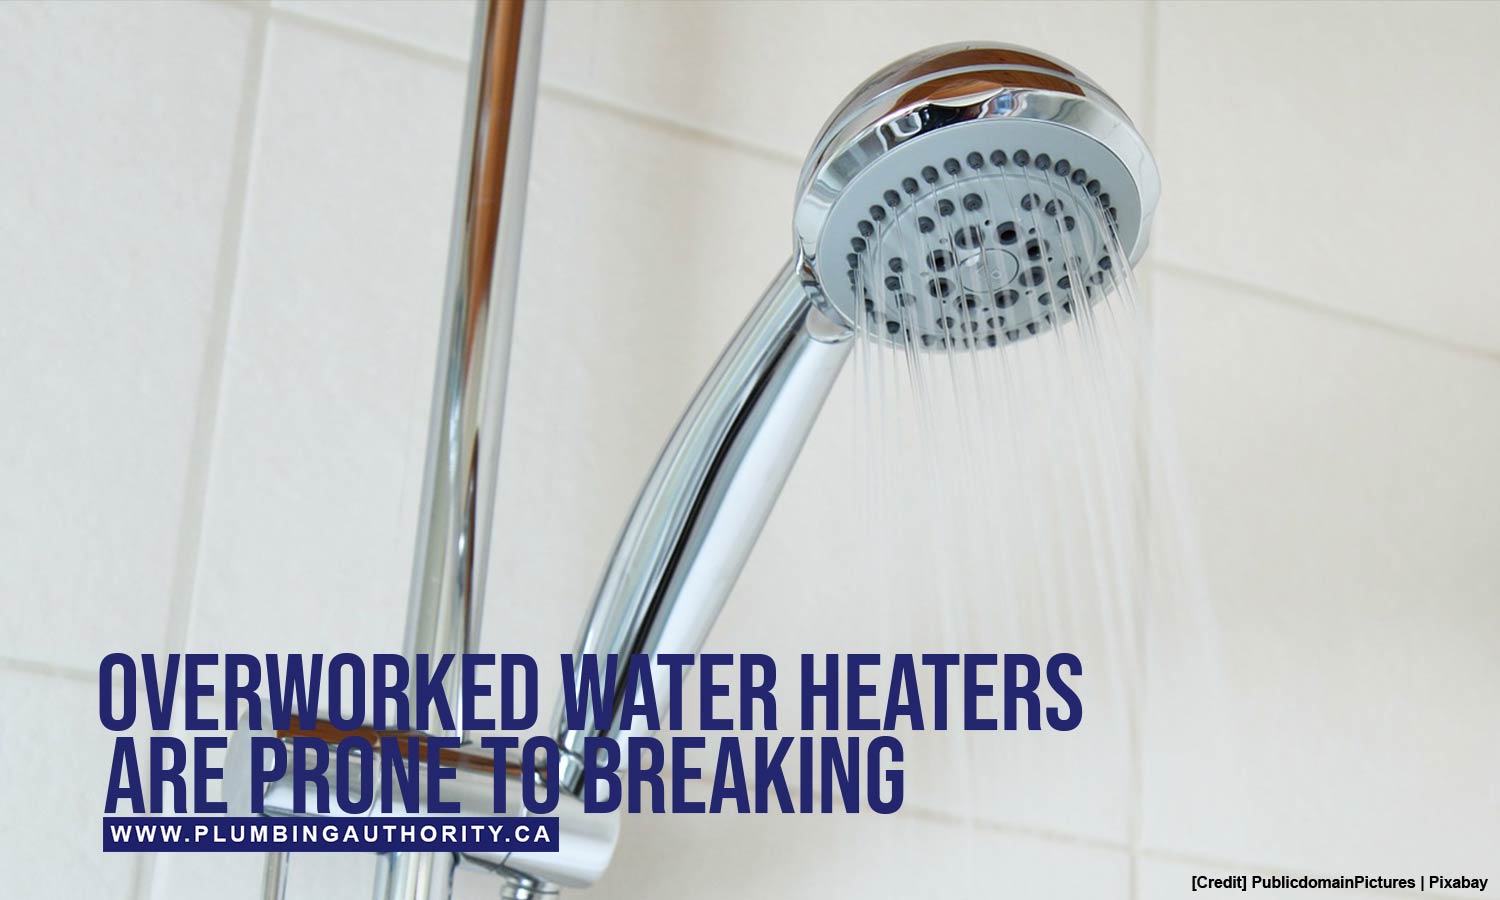 Overworked water heaters are prone to breaking